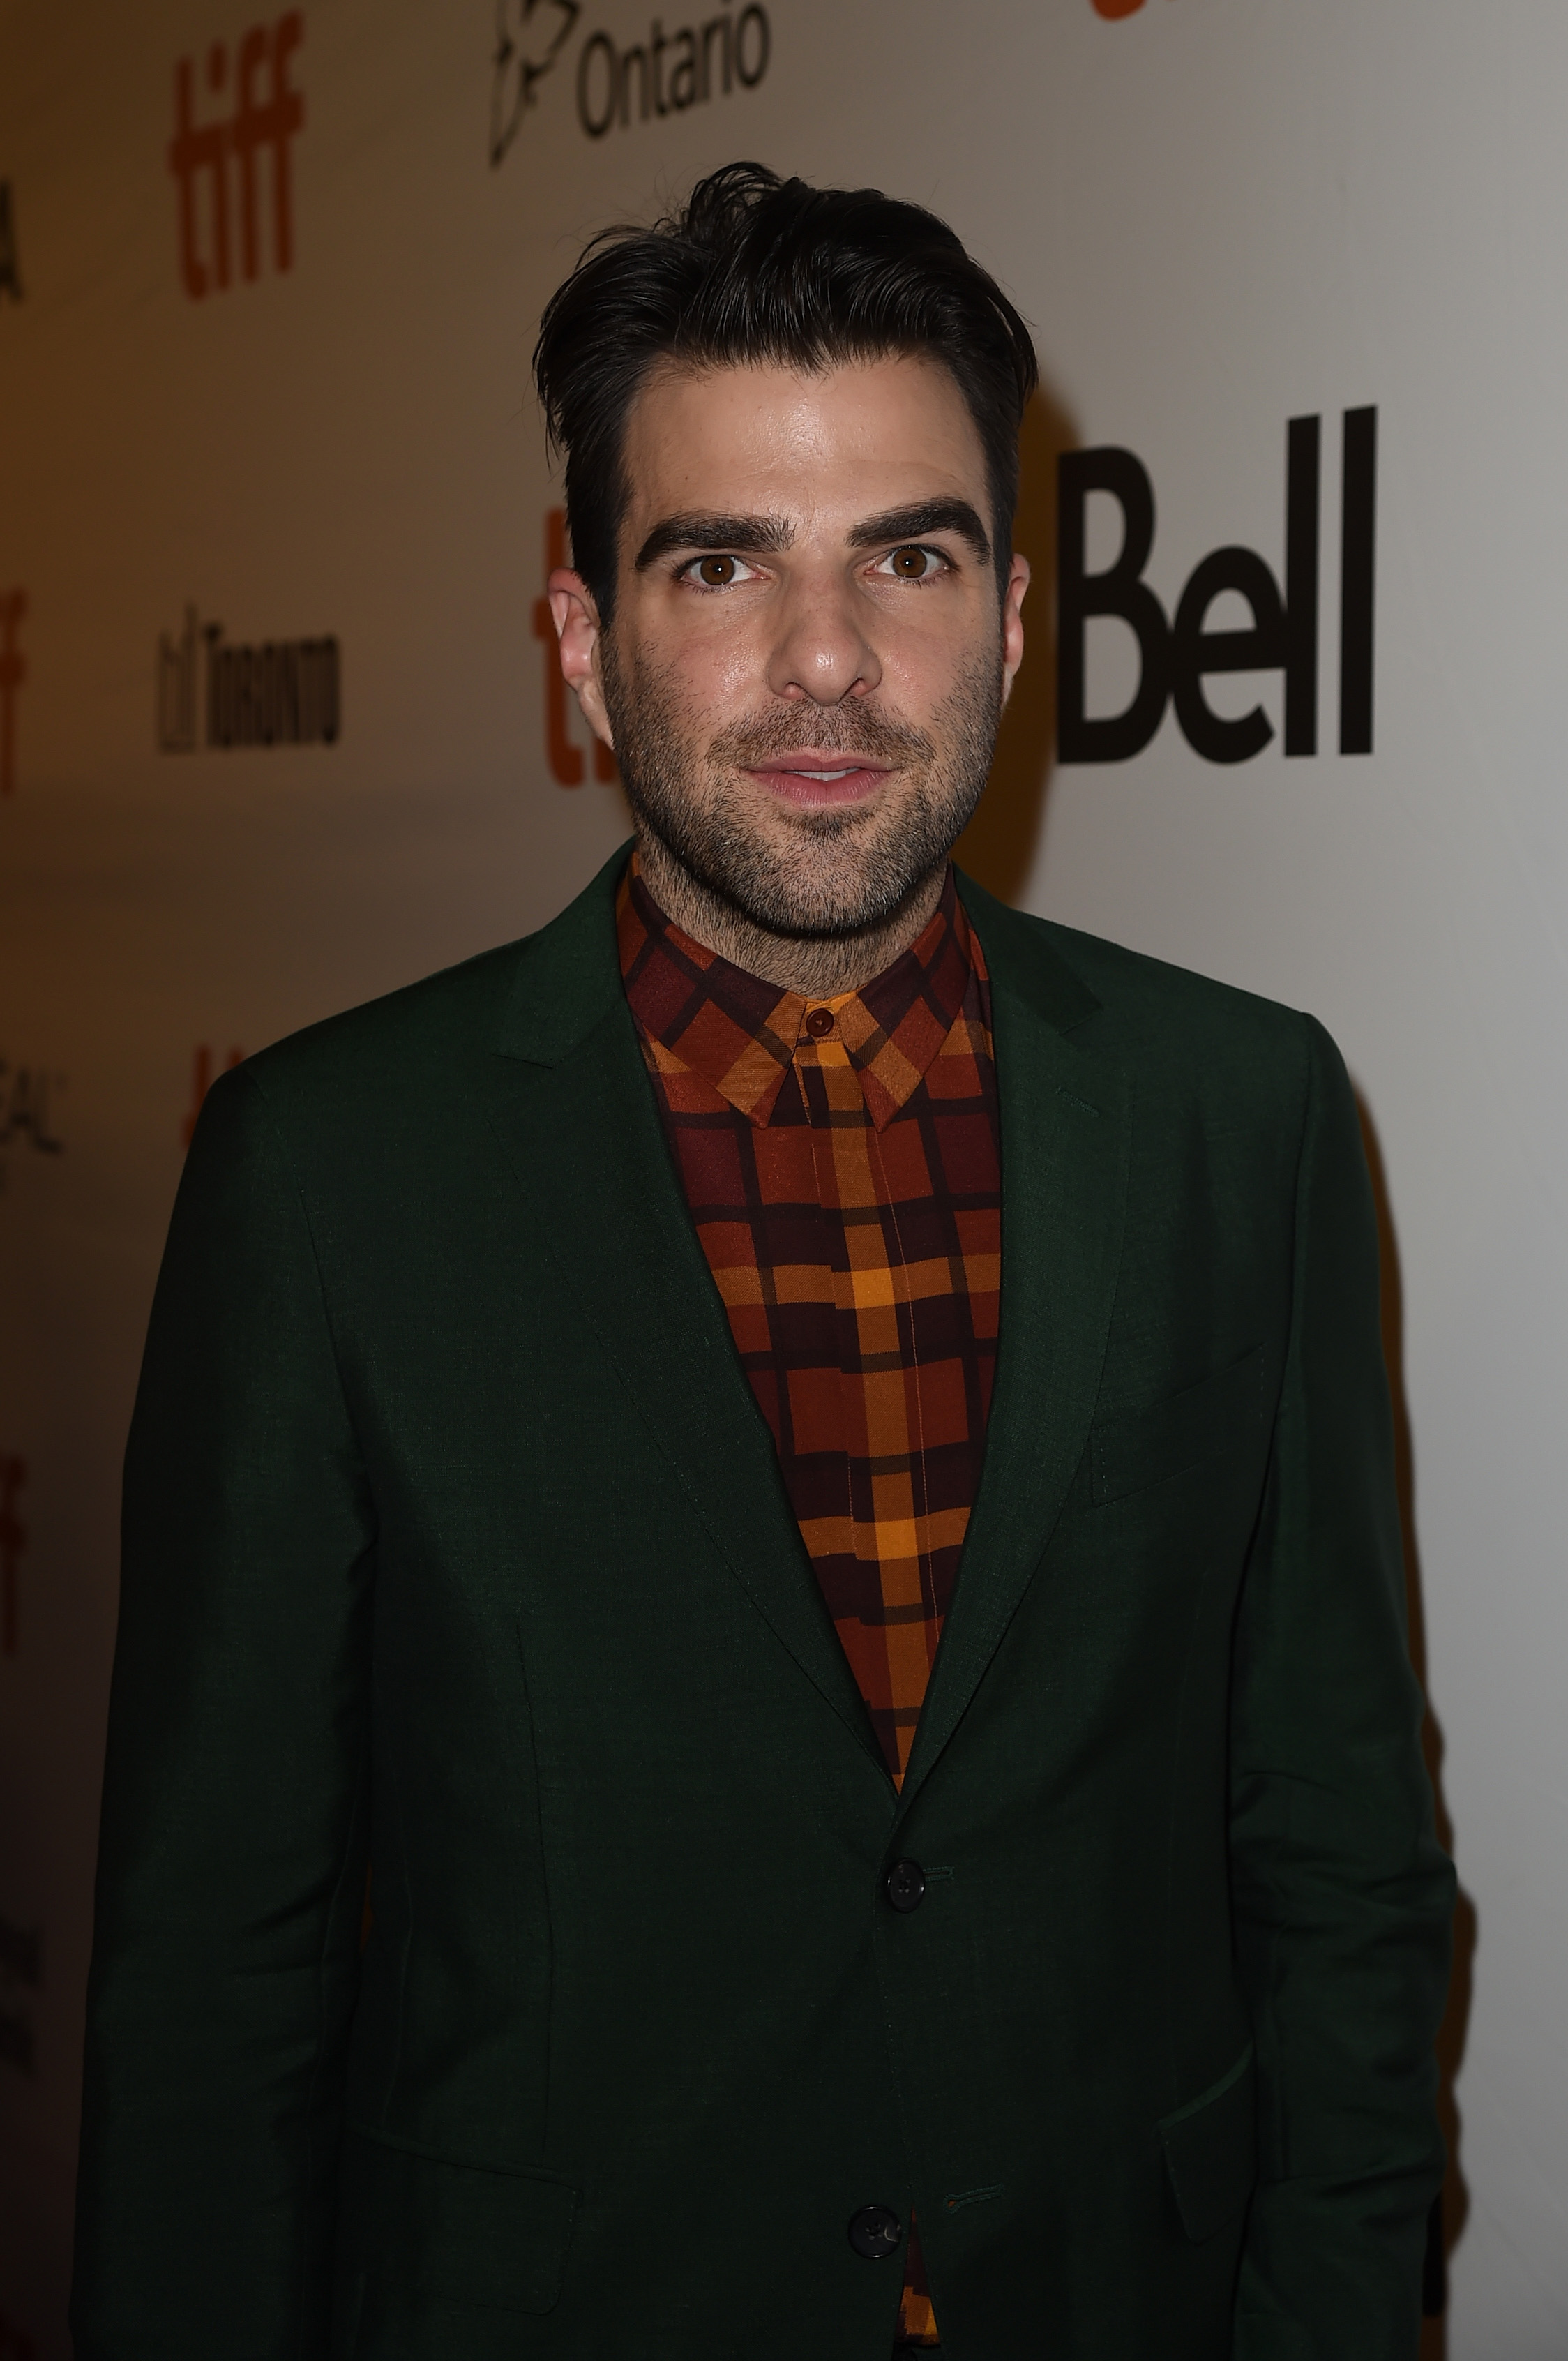 TORONTO, ON - SEPTEMBER 09:  Actor Zachary Quinto attends the "Snowden" premiere during the 2016 Toronto International Film Festival at Roy Thomson Hall on September 9, 2016 in Toronto, Canada.  (Photo by Kevin Winter/Getty Images)